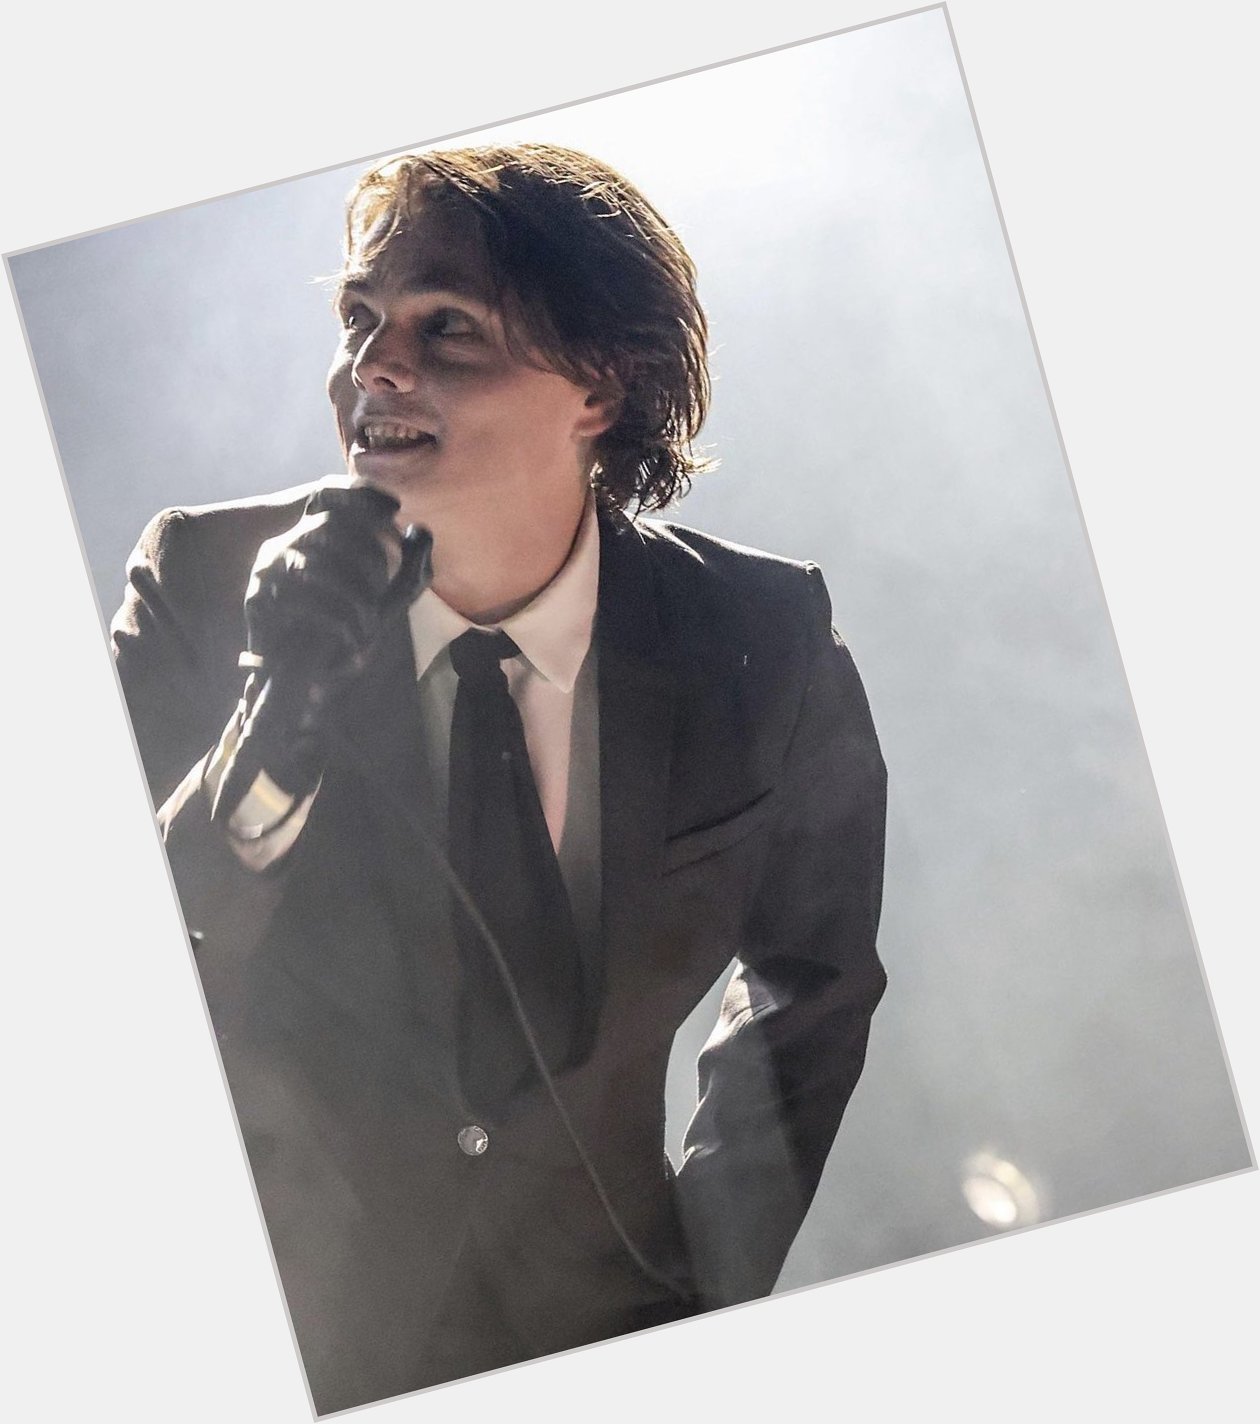 Very incredibly happy birthday to gerard way light of my life !! 